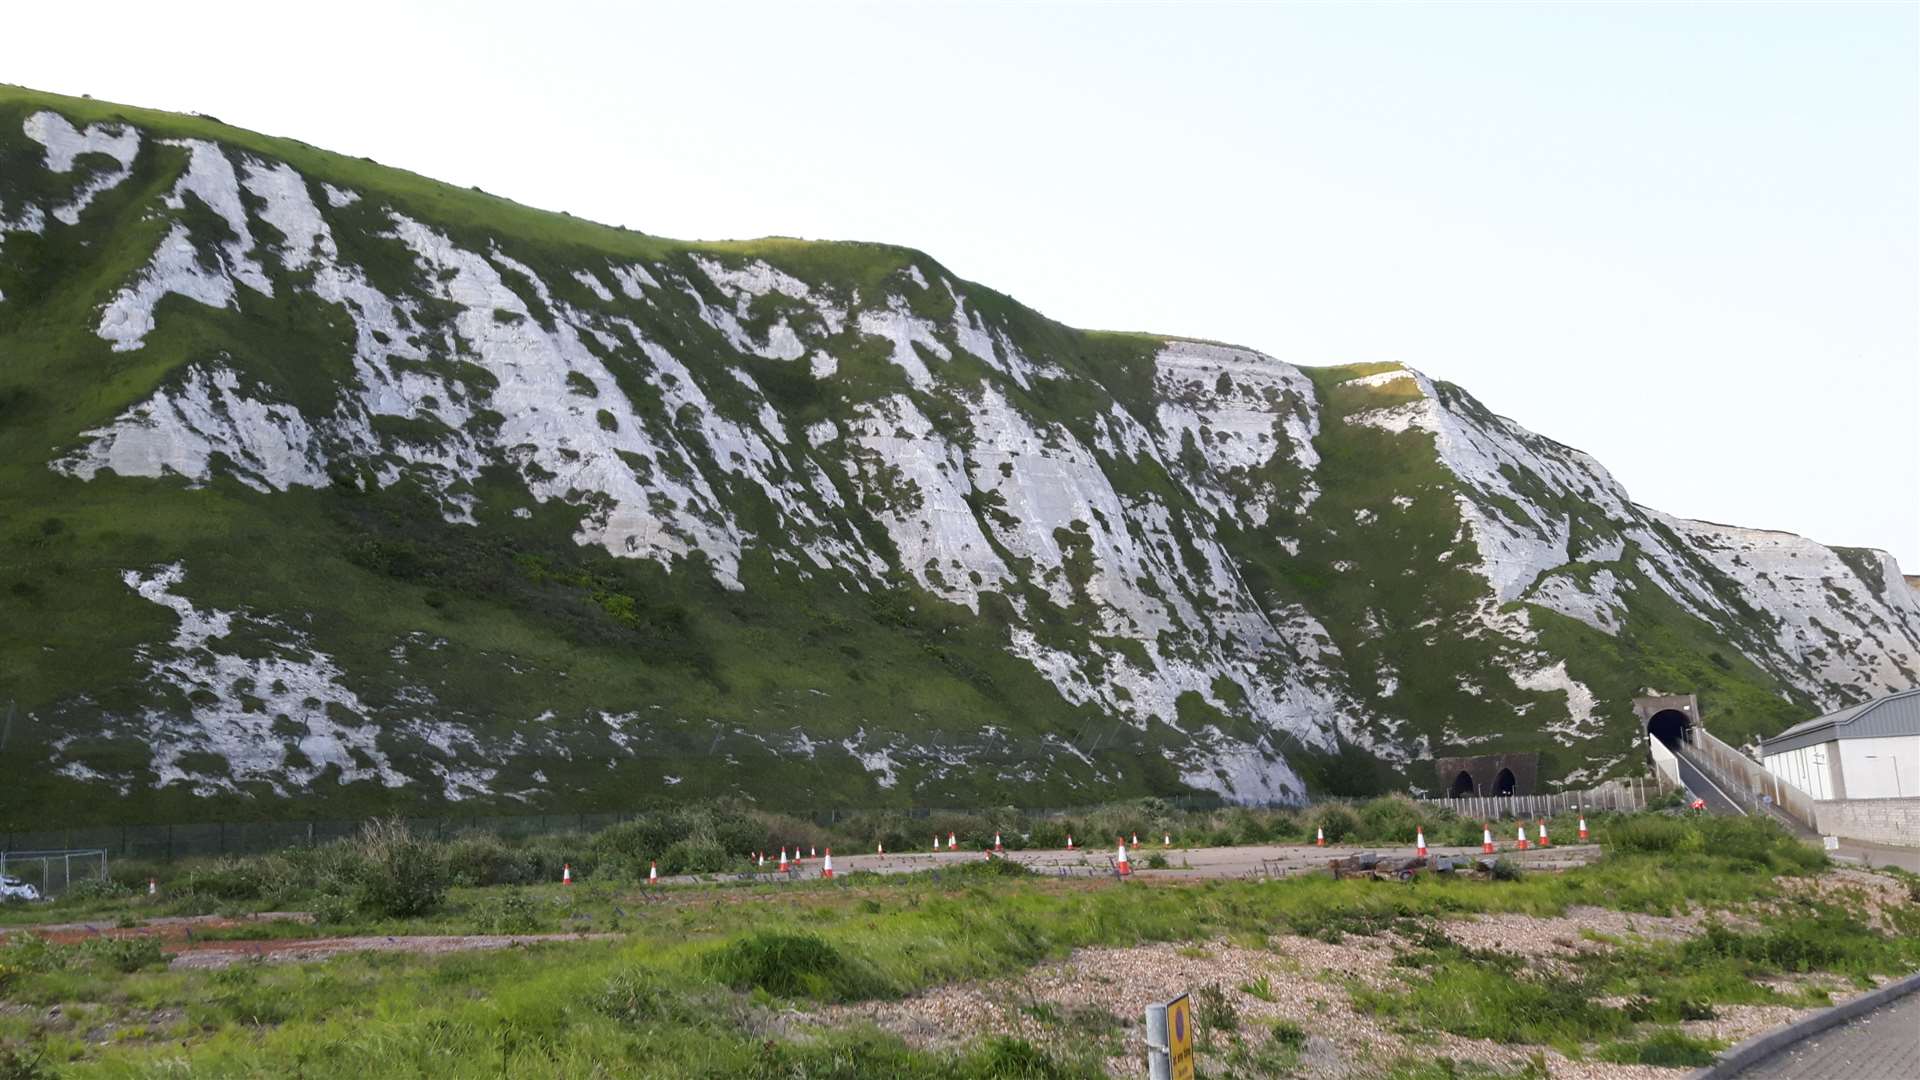 The migrants were found at Samphire Hoe